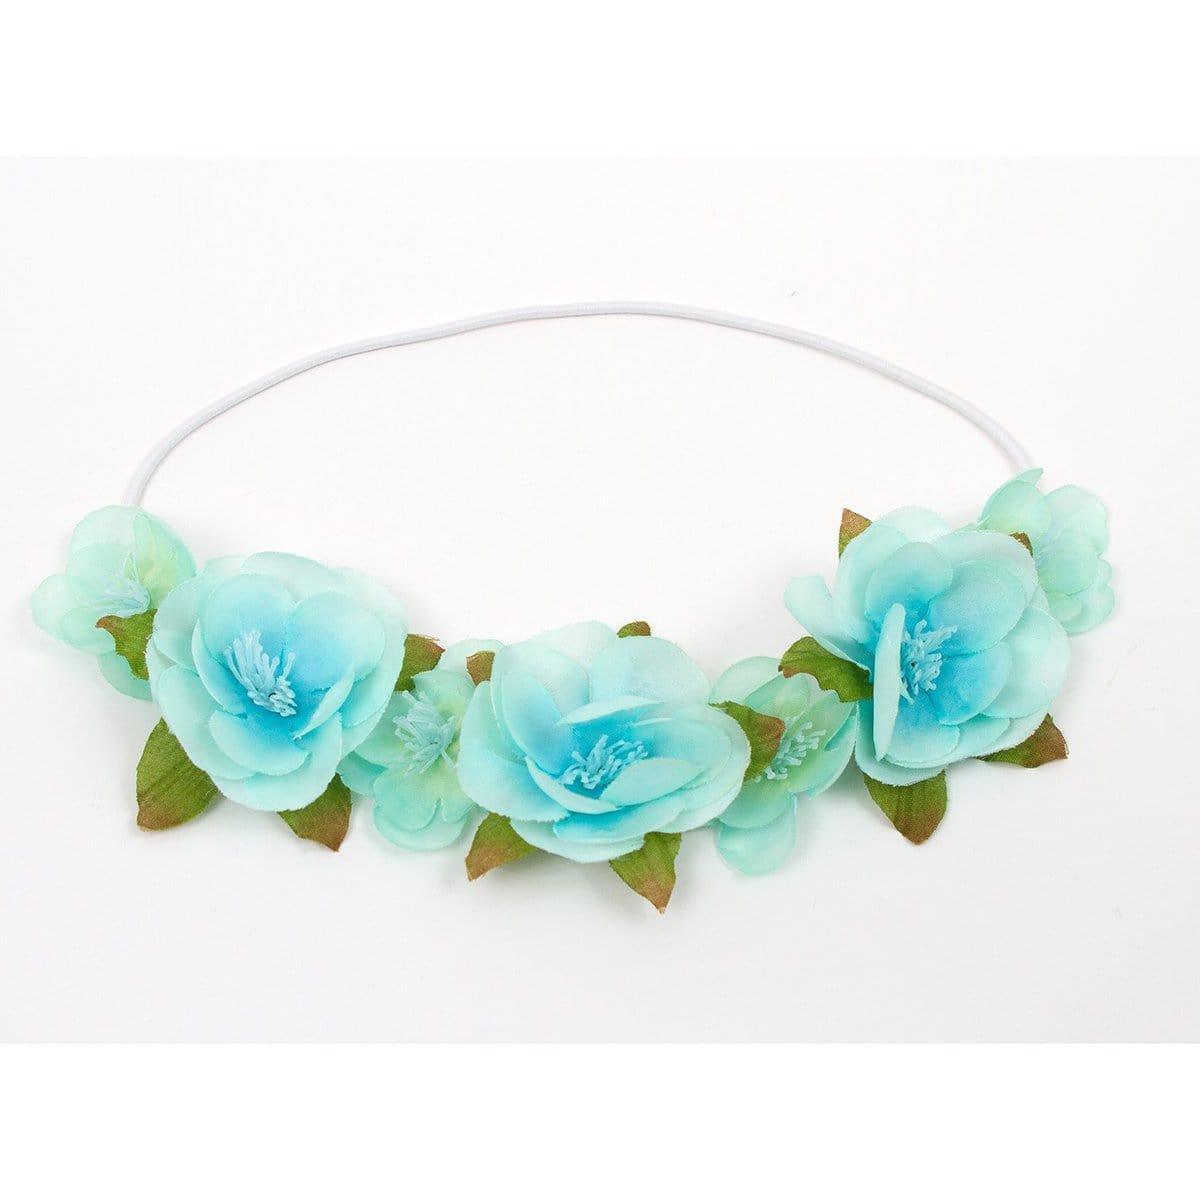 Buy Costume Accessories Teal flower headband for kids sold at Party Expert